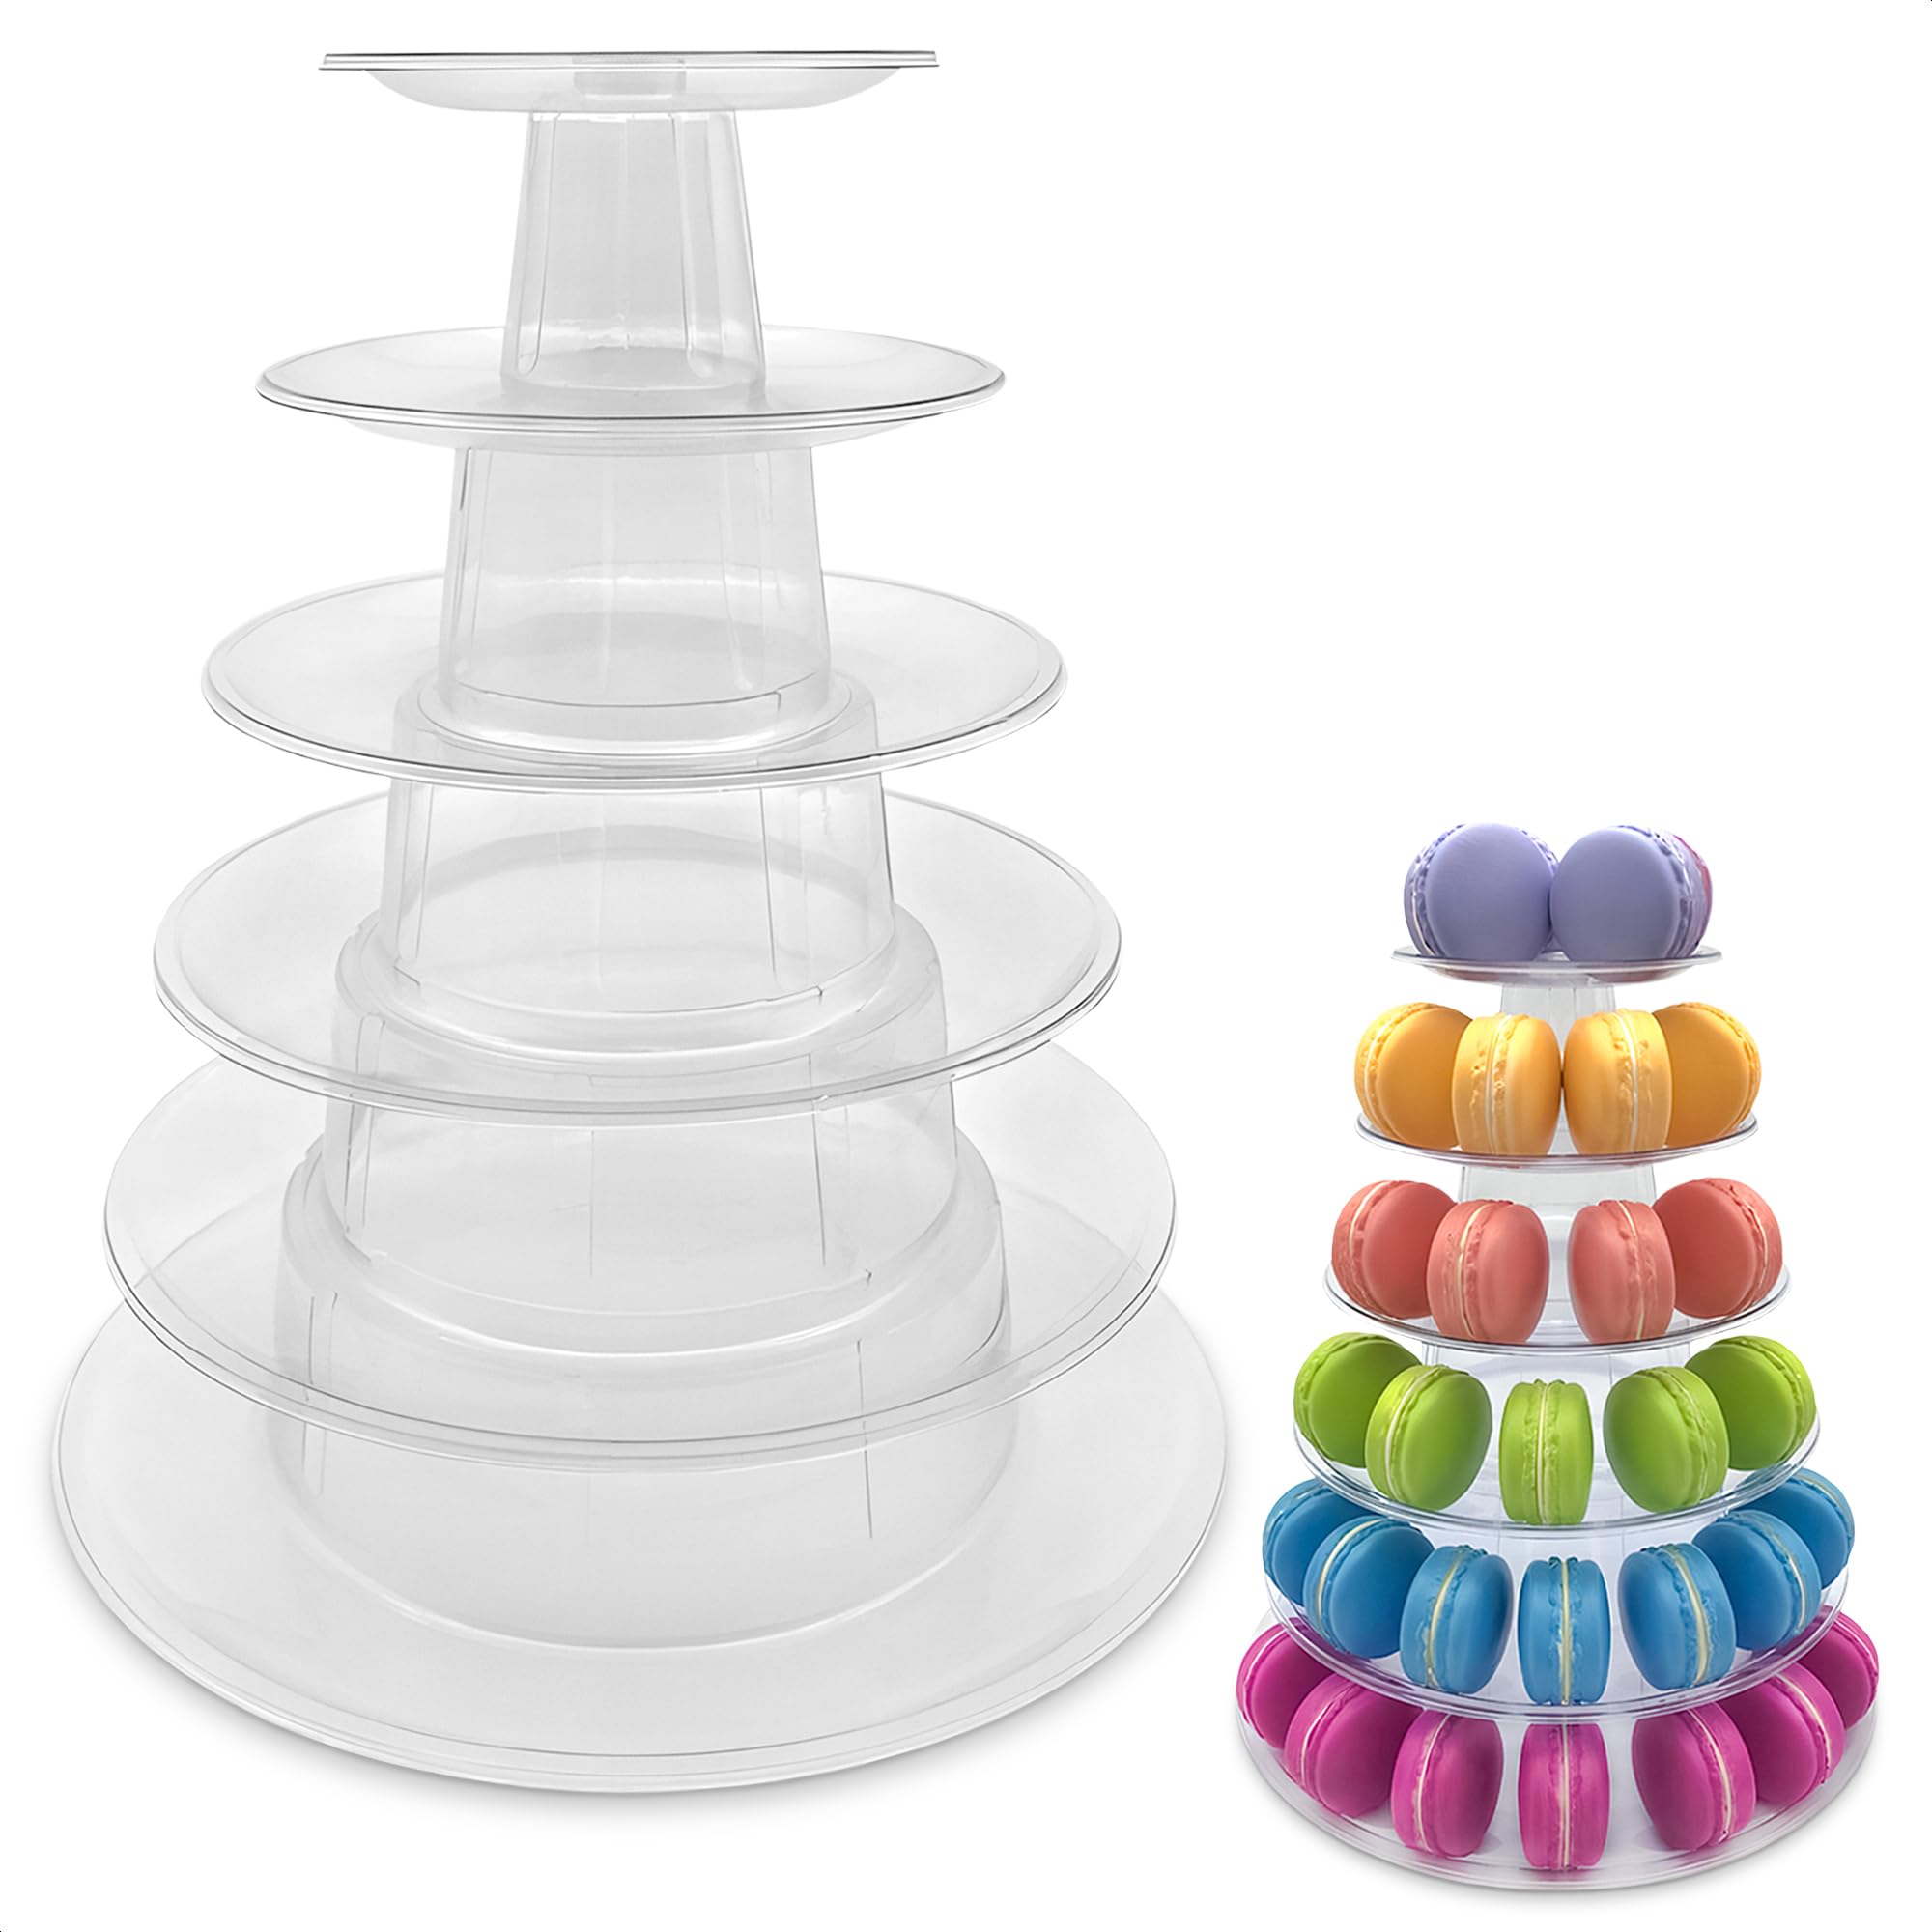 6 Tiered Tray Stand Round Macaroon Tower - Macarons Cookie Tower Display Stand for Food Display Cupcake Holder Wedding Decor Macaron Tower Stand - Macarons Decor Cupcake Tower Tiered Serving Tray